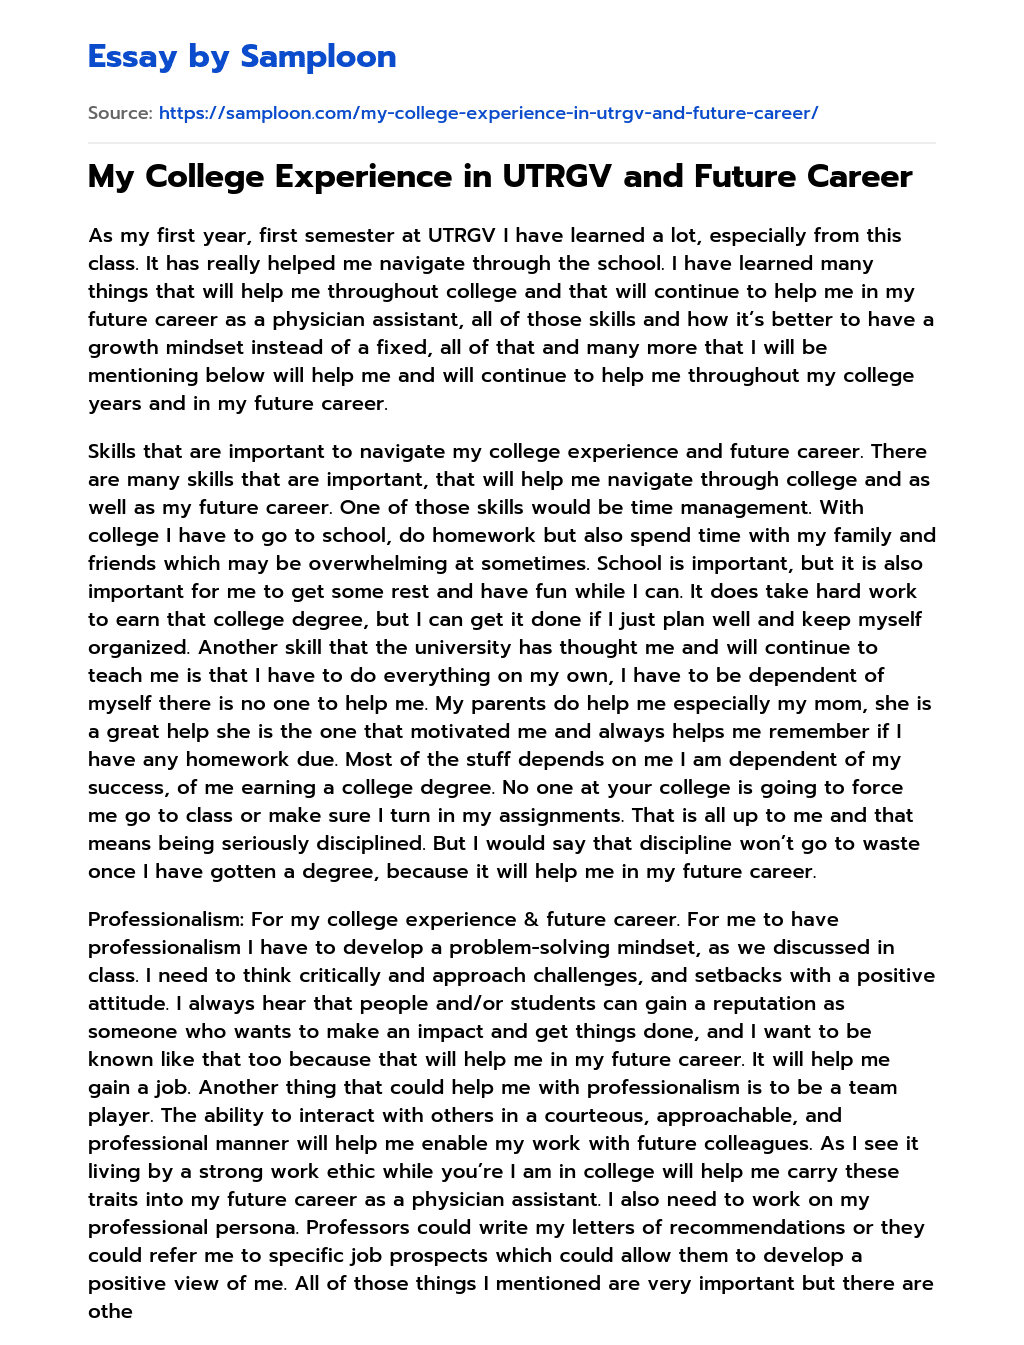 My College Experience in UTRGV and Future Career essay